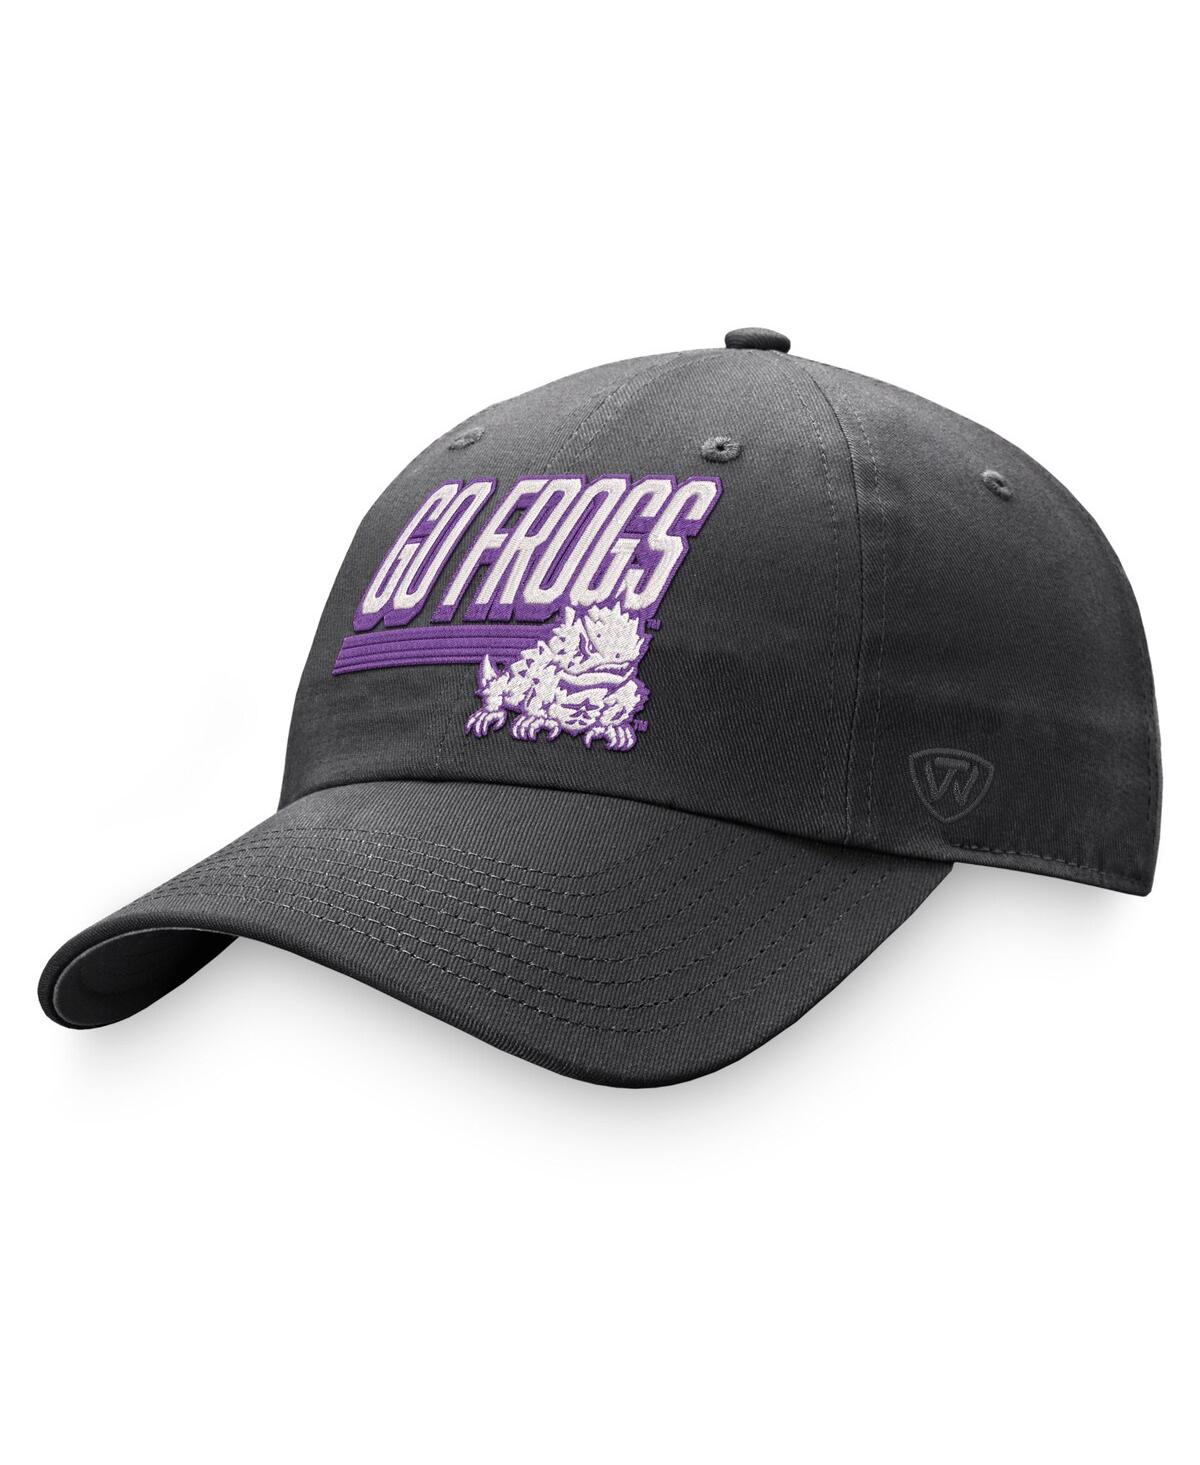 Men's Top of the World Charcoal Tcu Horned Frogs Slice Adjustable Hat - Charcoal